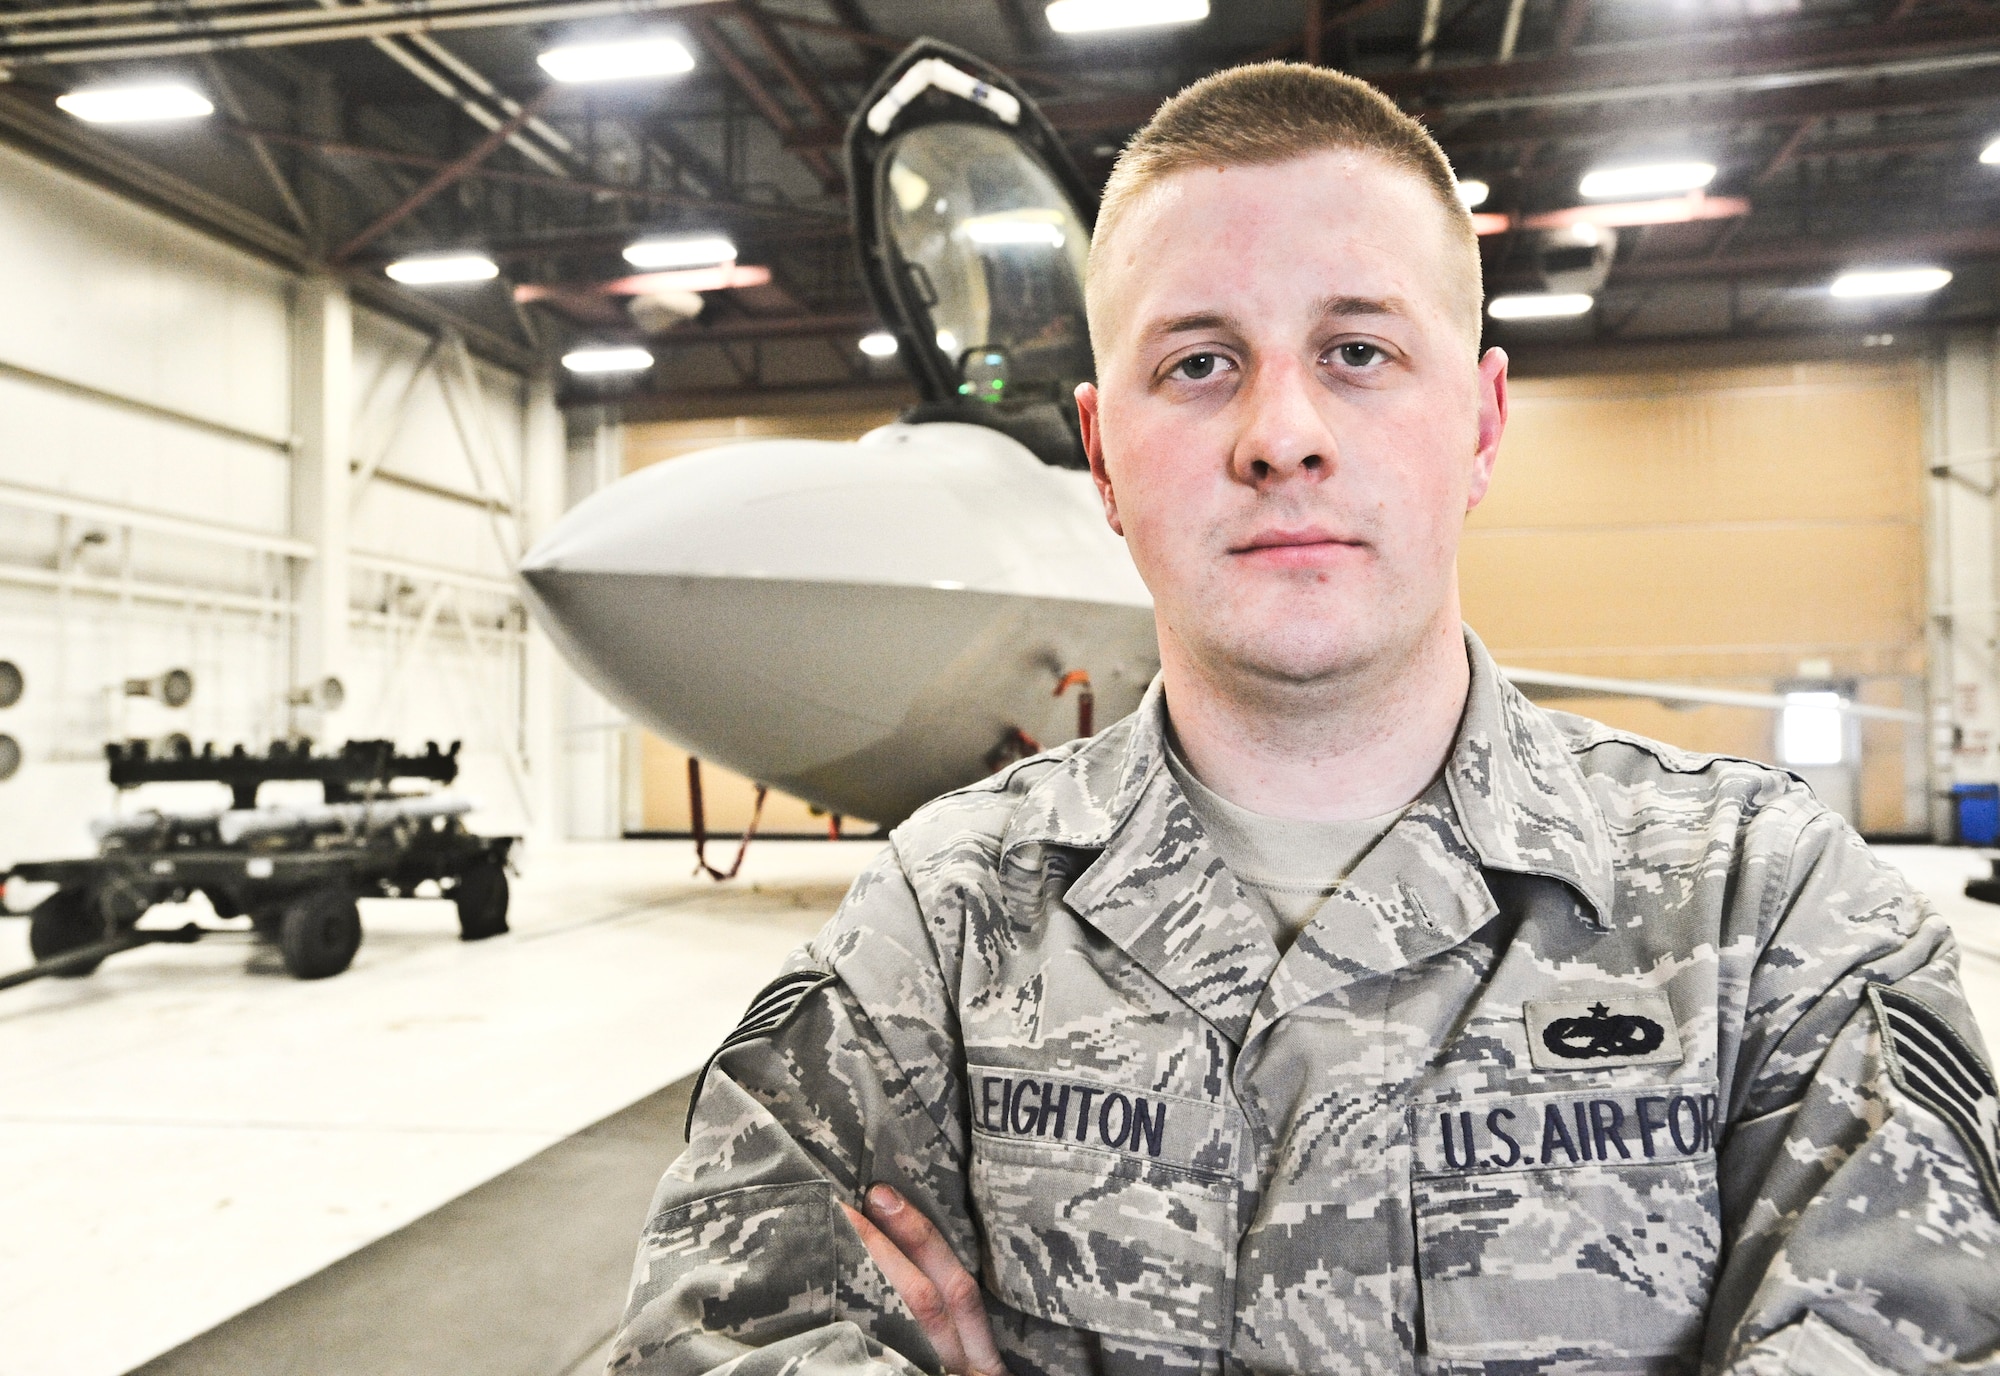 ELMENDORF AIR FORCE BASE, Alaska -- Staff Sgt. Jason Leighton, 90th Aircraft Maintenance Unit, is the 2009 Lt. Gen. Leo Marquez Award winner in the Munitions/Missile Technician Supervisor Category. The Marquez Award is one of the highest honors for a maintainer for Air Force-level awards. (U.S. Air Force photo/ Senior Airman Matthew Owens)